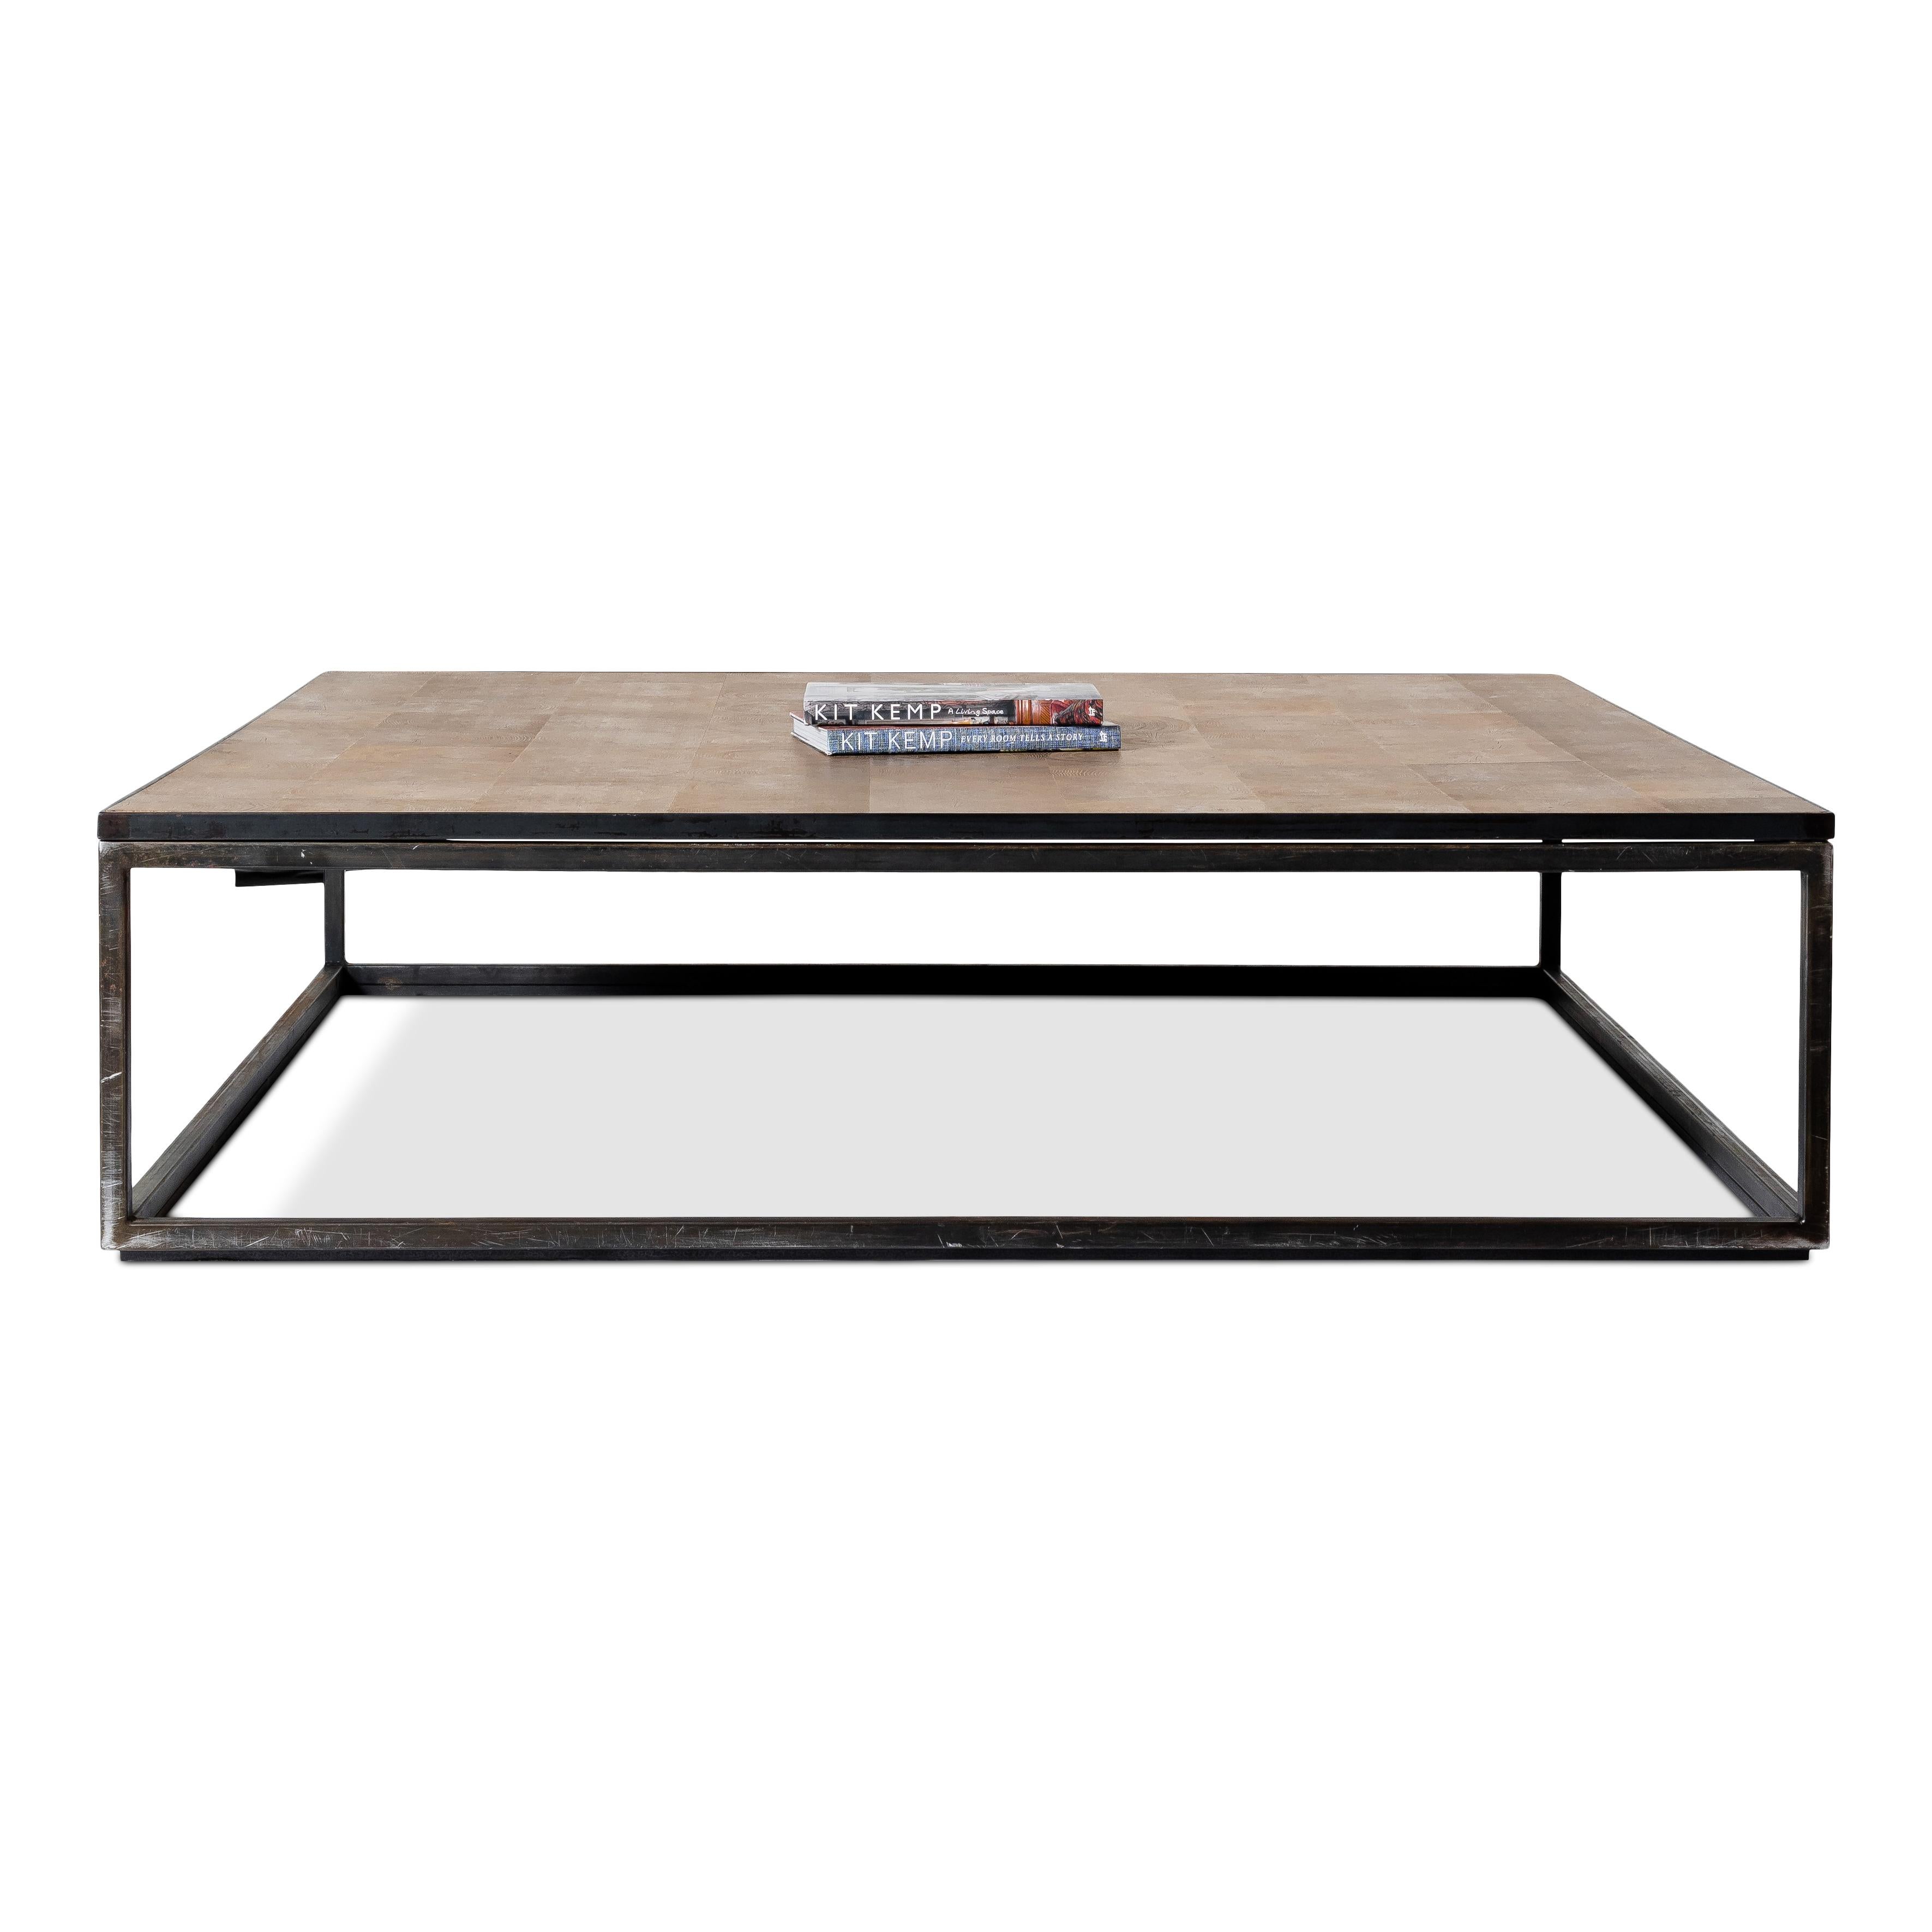 Modernist Ebonized Steel and End Cut Oak Coffee Table

Designed by Brendan Bass for the Vision and Design Collection, by using high quality materials and textures. All materials are sourced from local vendors throughout the state of Texas. The